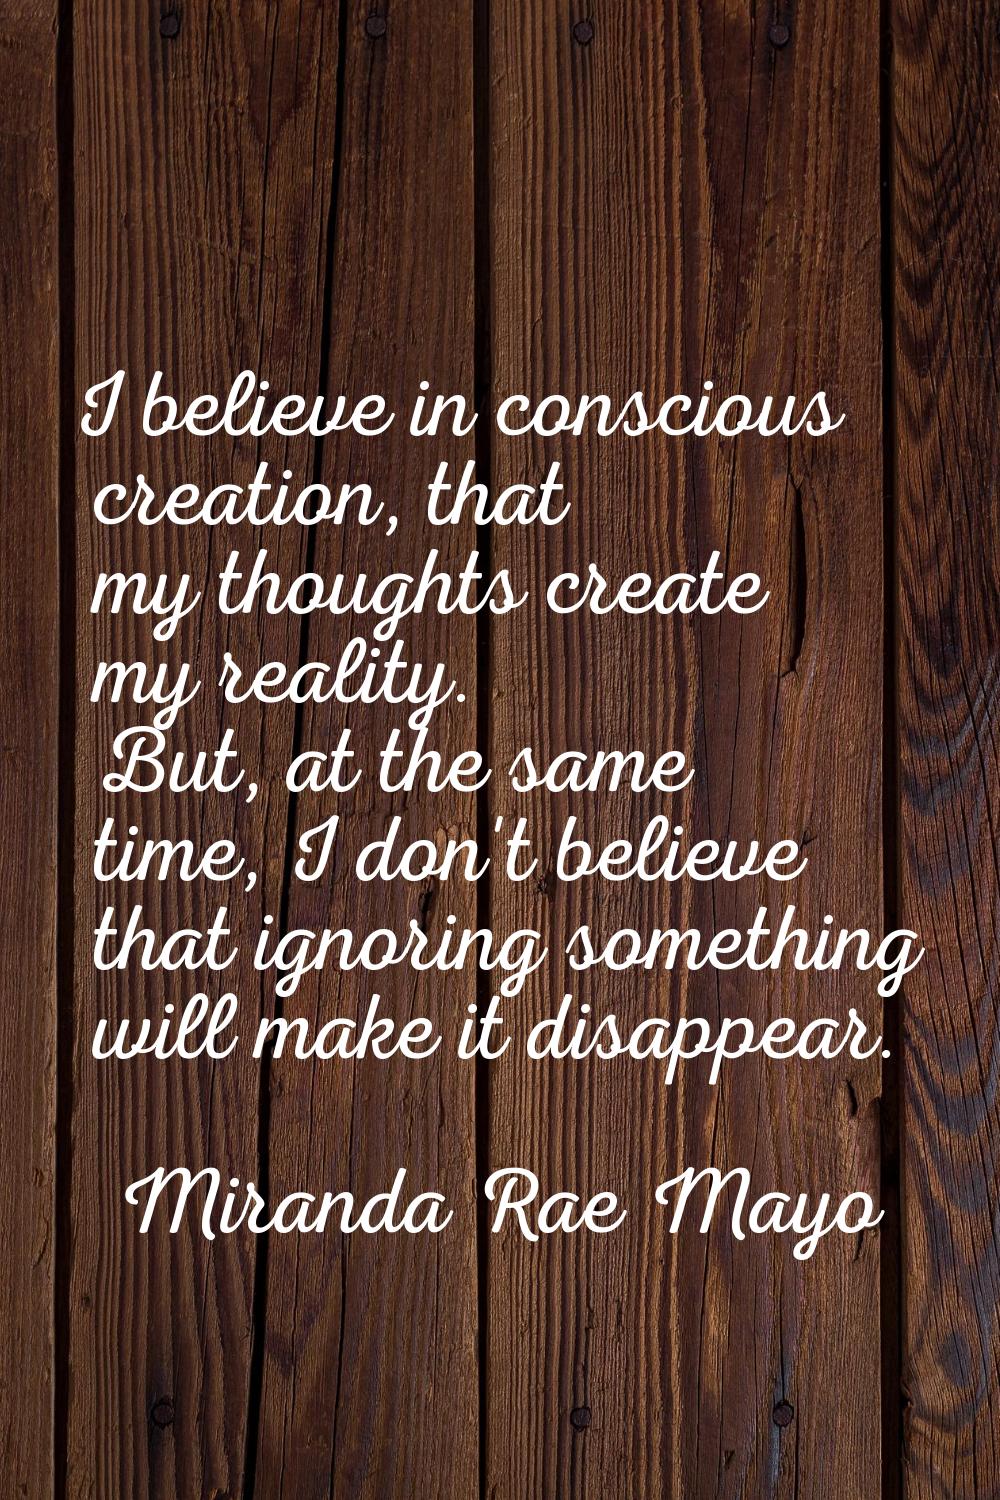 I believe in conscious creation, that my thoughts create my reality. But, at the same time, I don't